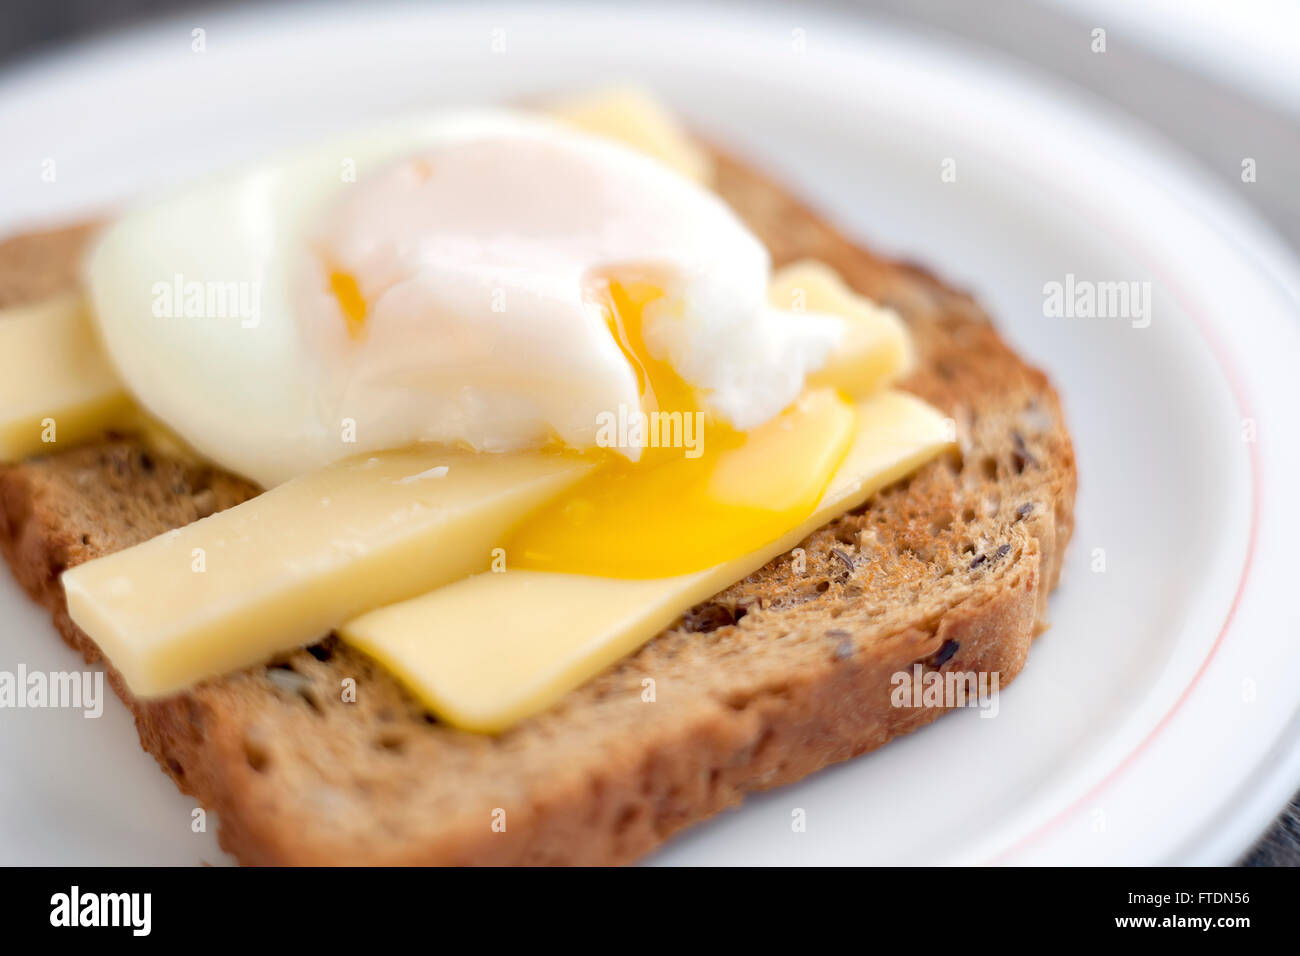 Poached egg on brown bread toast with cheddar cheese. Stock Photo